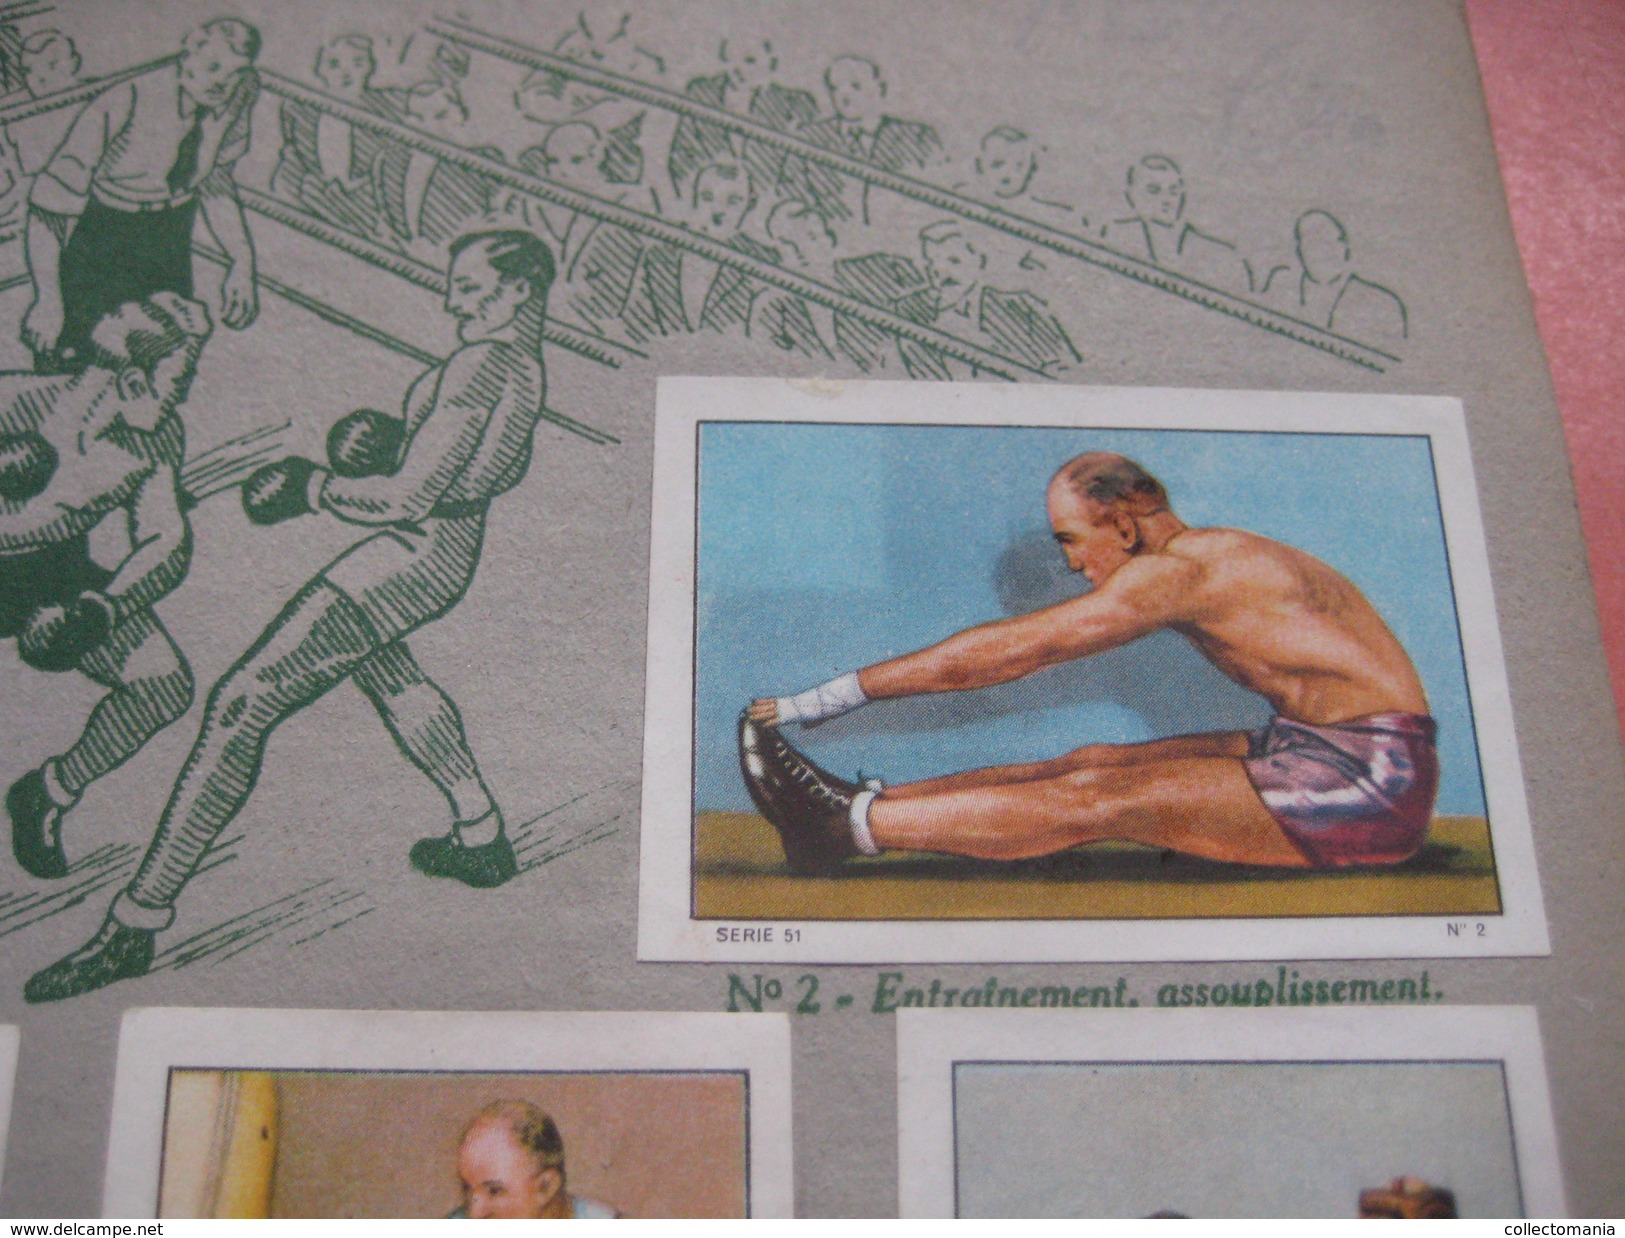 many cards, all photograped: photos, tradecards, cards, labels,  LUTTE 1907 poster stamp; Siam kick boxing ; ALBERT MAES